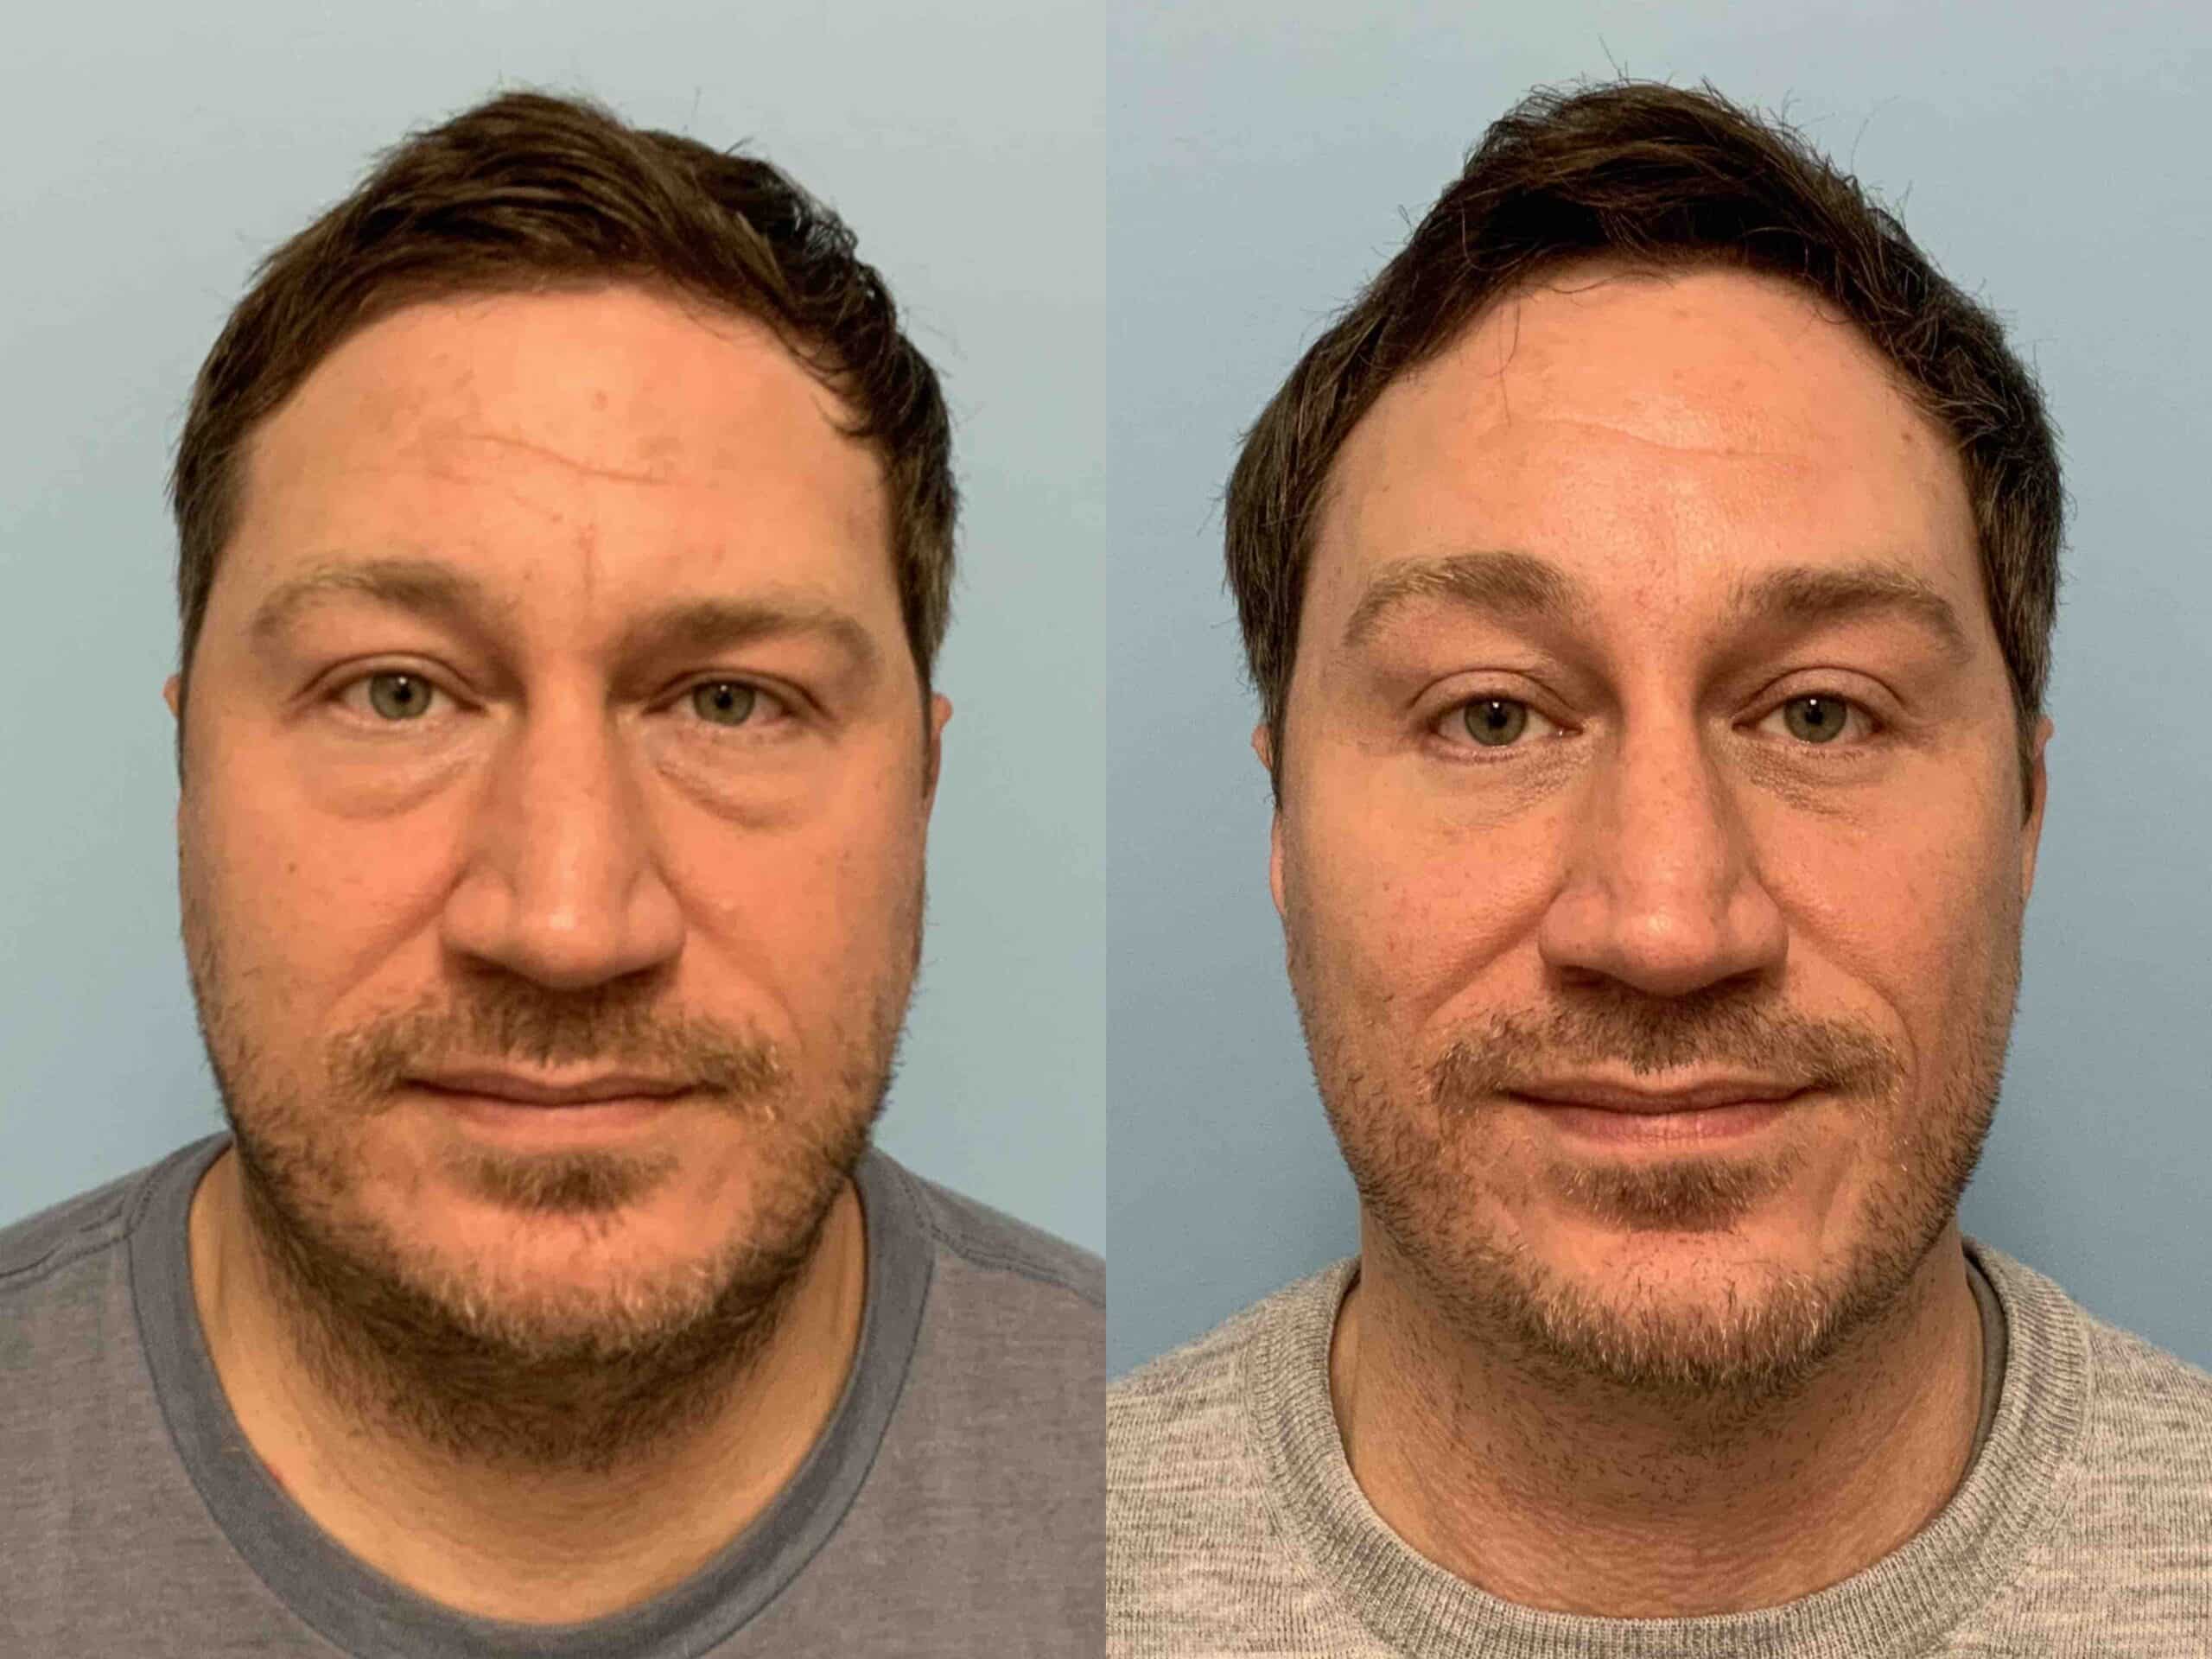 Before and after, 10 mo post op from Lower Blepharoplasty, Canthopexy, Endo Brow lift performed by Dr. Paul Vanek (front view)